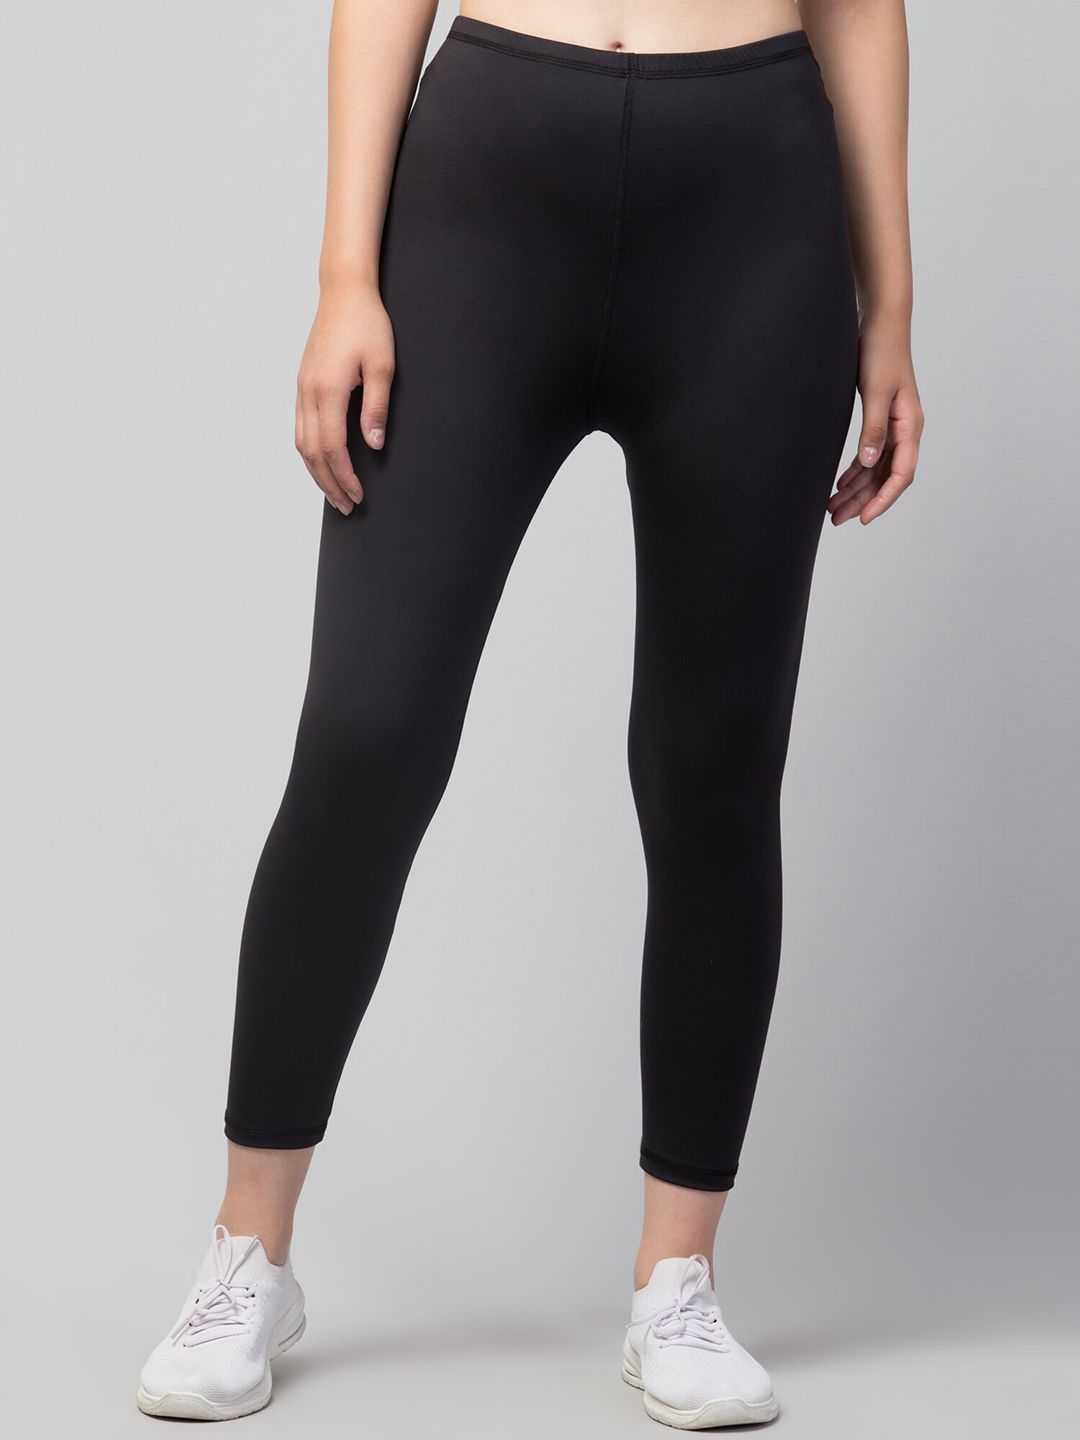 Apraa & Parma Women Black Solid High-Waist Tights Price in India